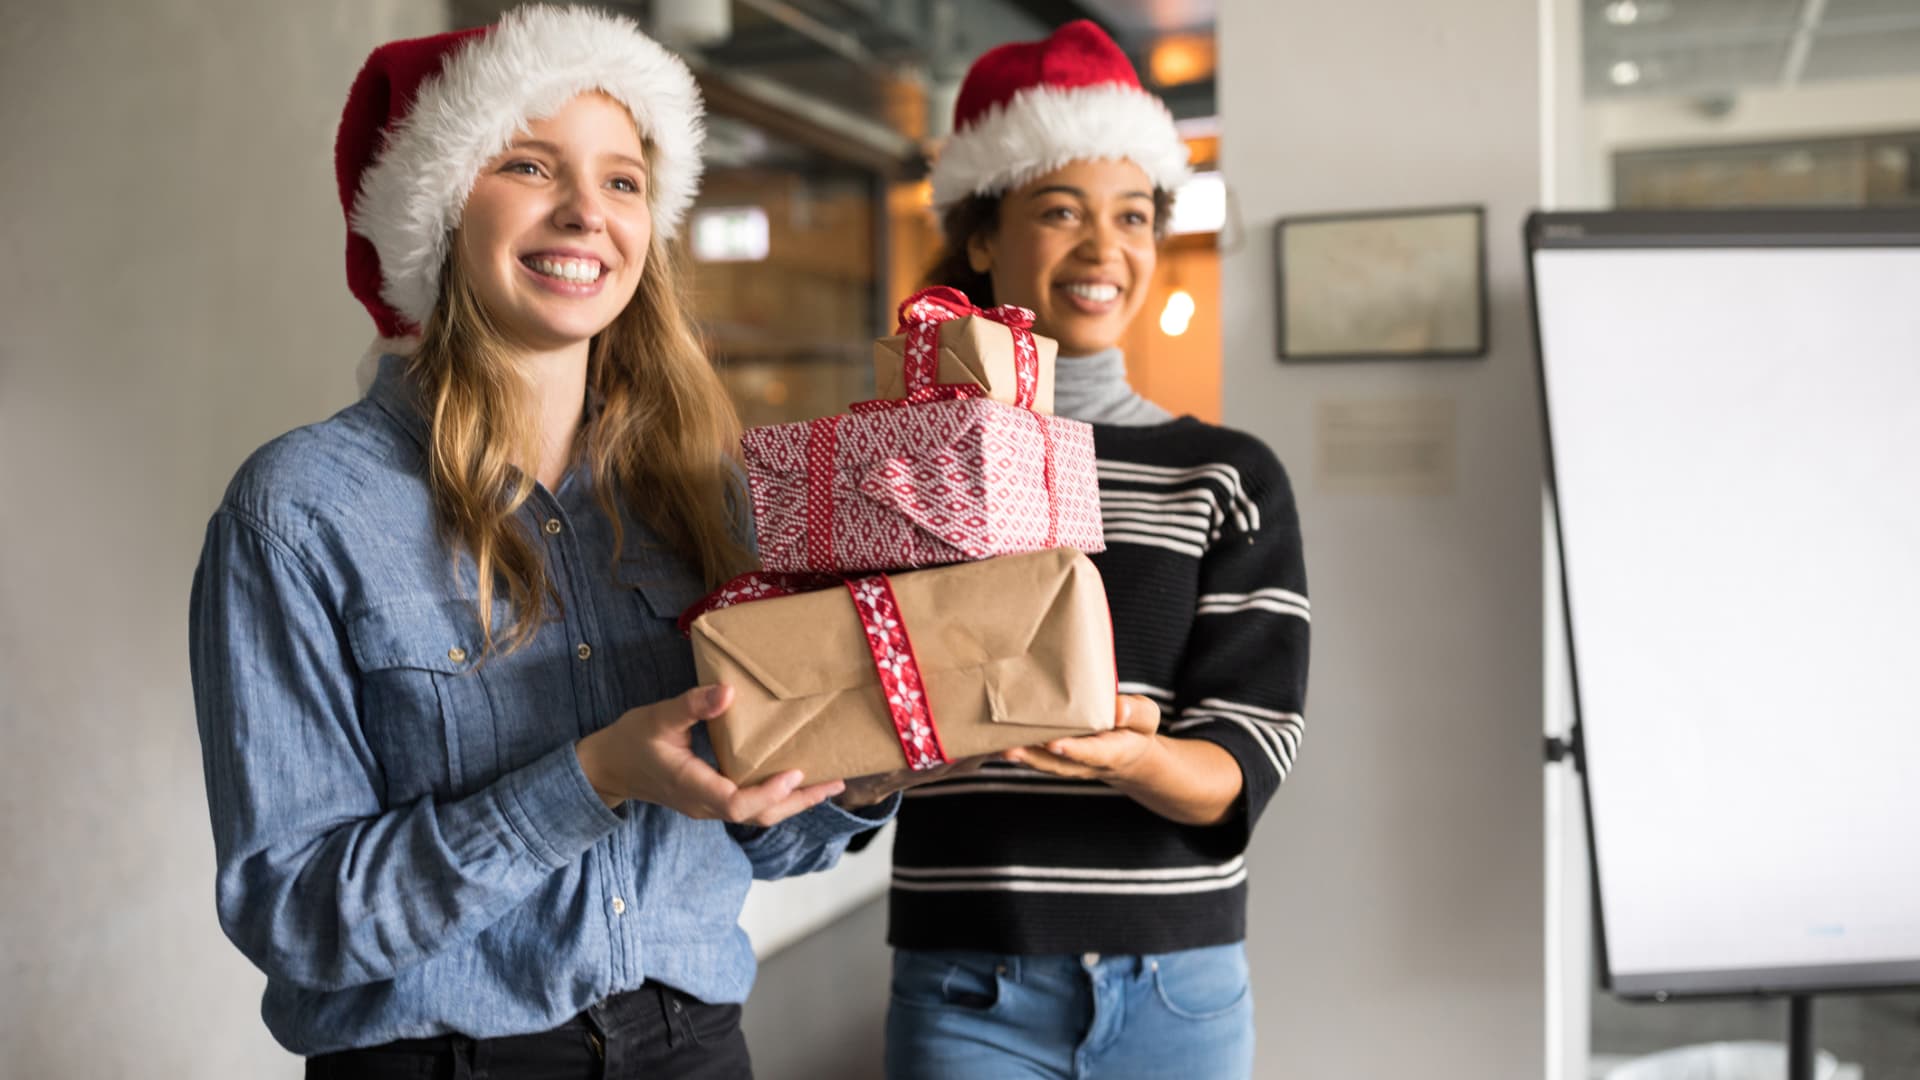 Should you buy a gift for your boss and co-workers for the holidays? HR experts weigh in